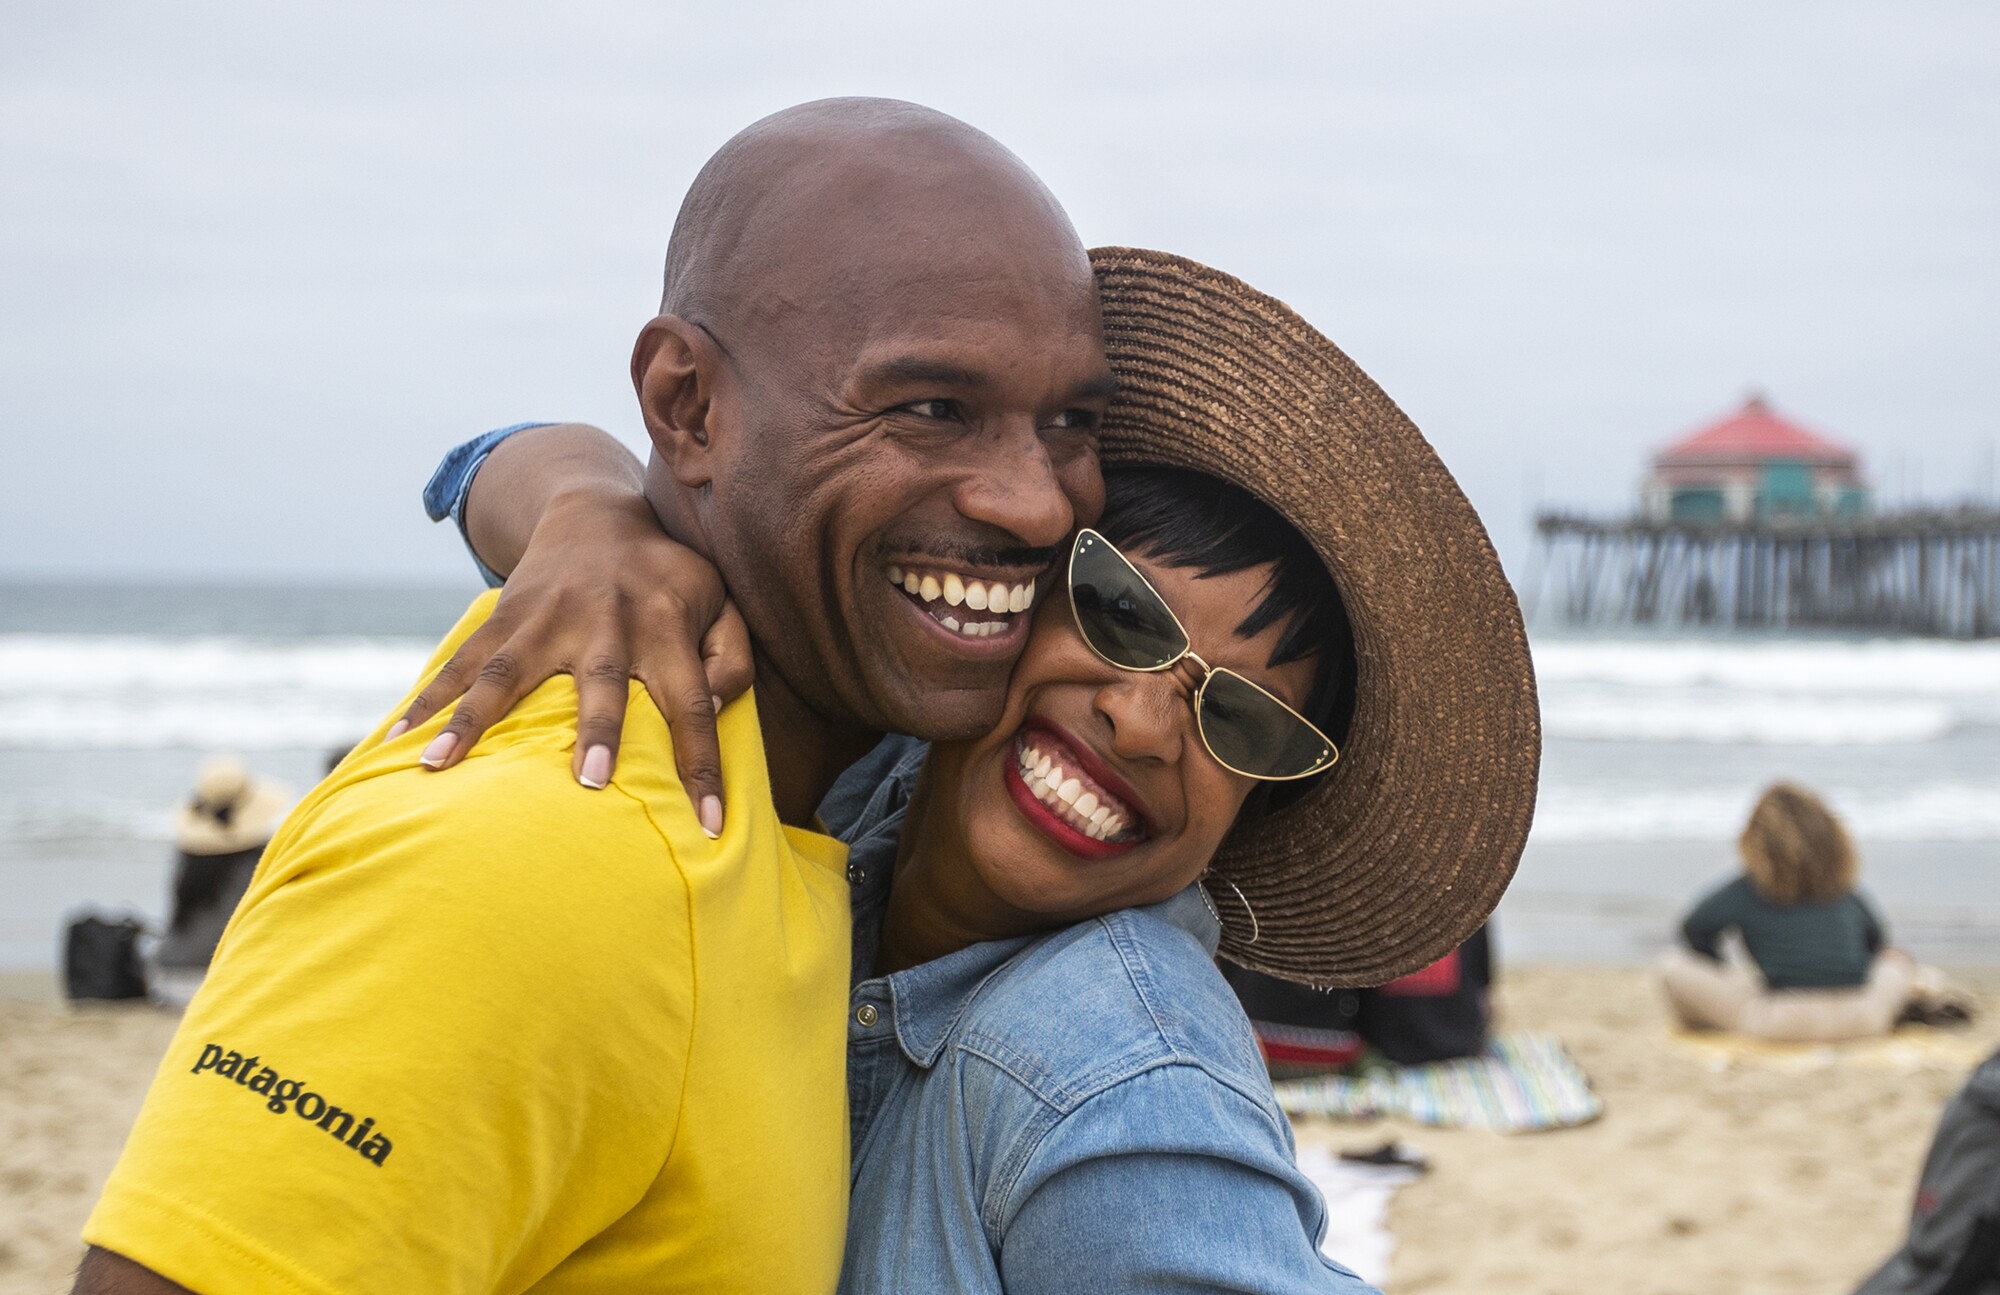 A woman in sunglasses hugs a smiling man.